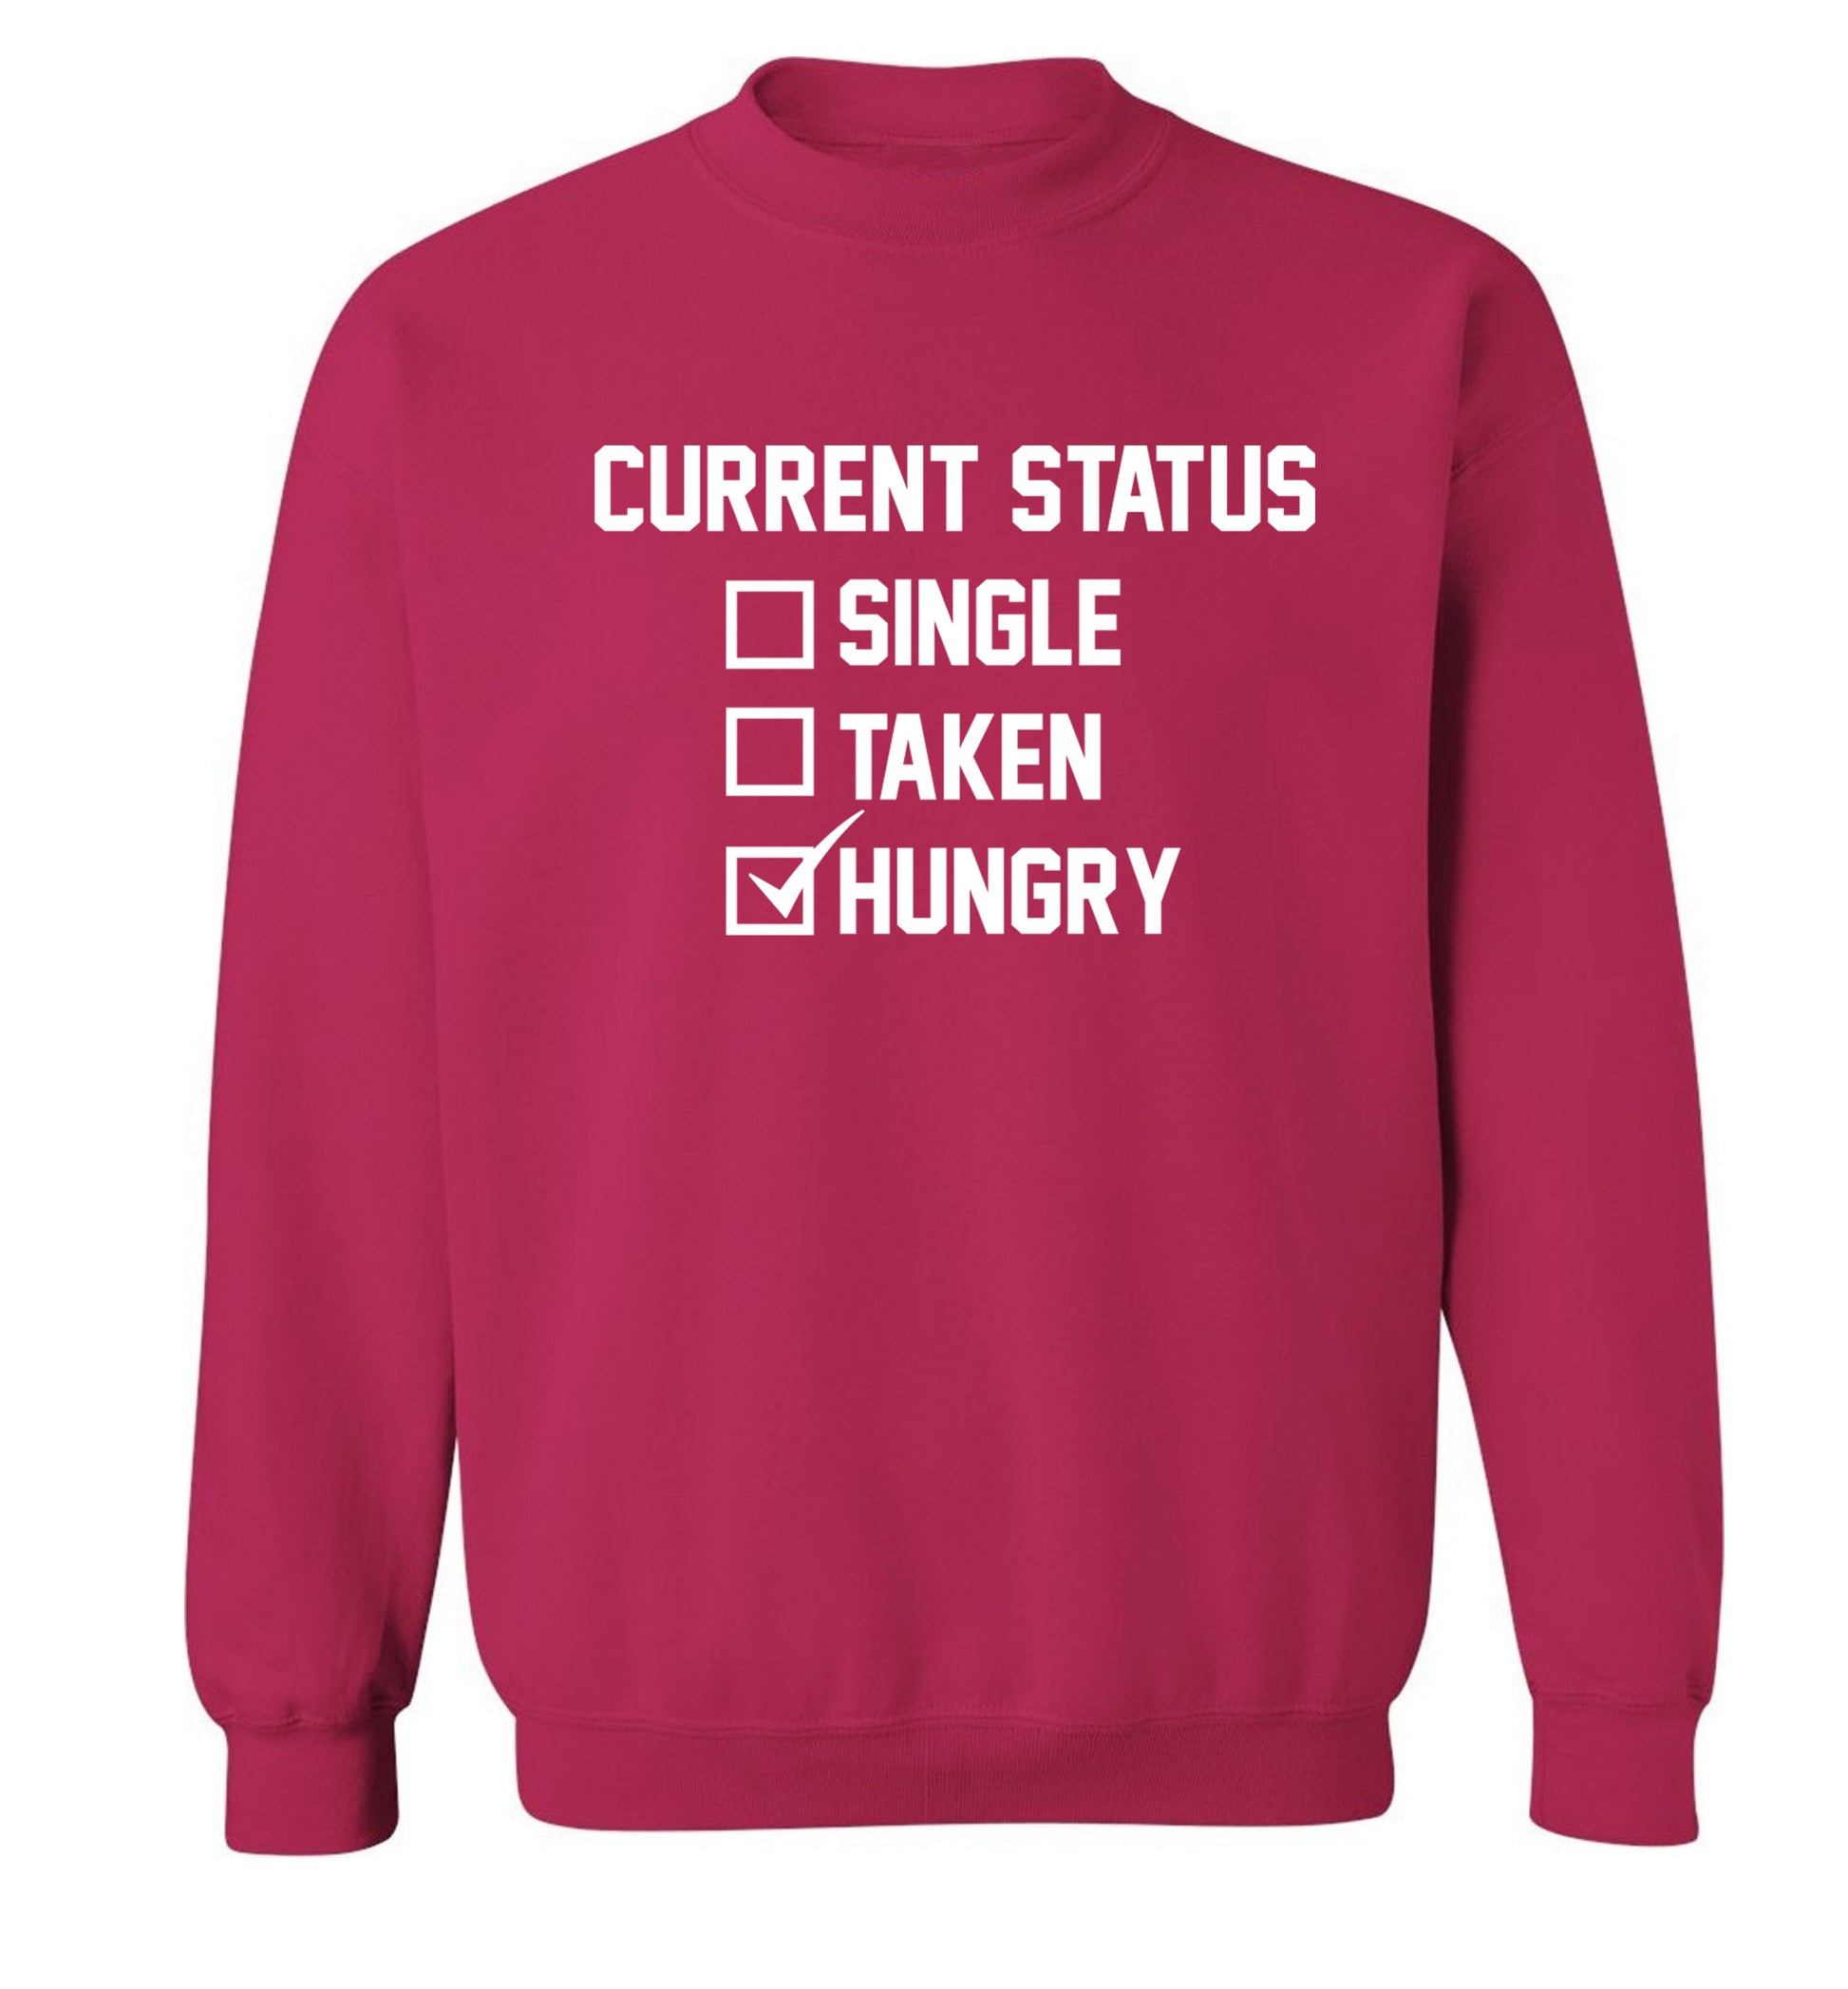 Relationship status single taken hungry Adult's unisex pink Sweater 2XL